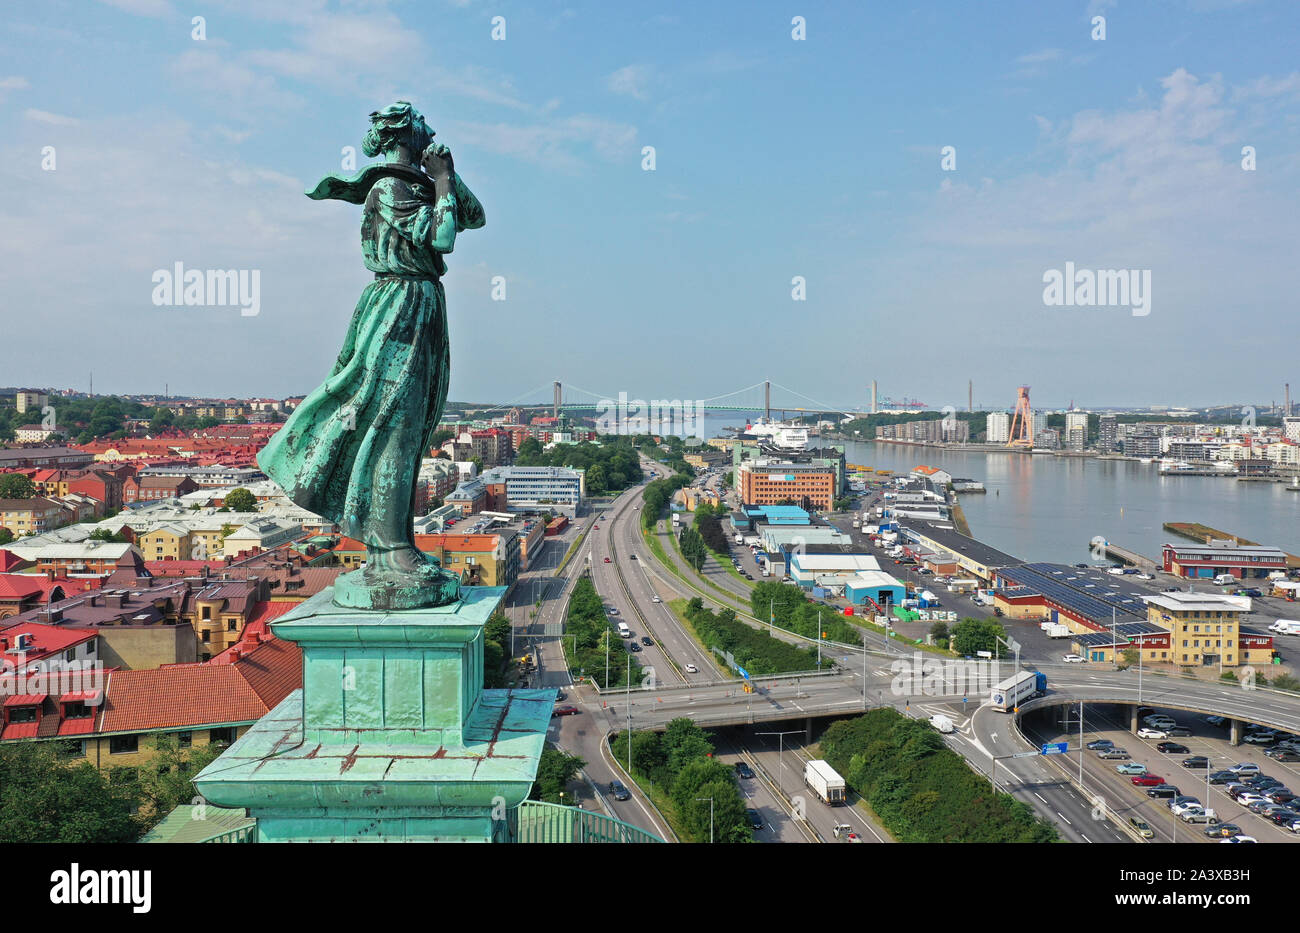 Sjöfartsmuseet High Resolution Stock Photography and Images - Alamy